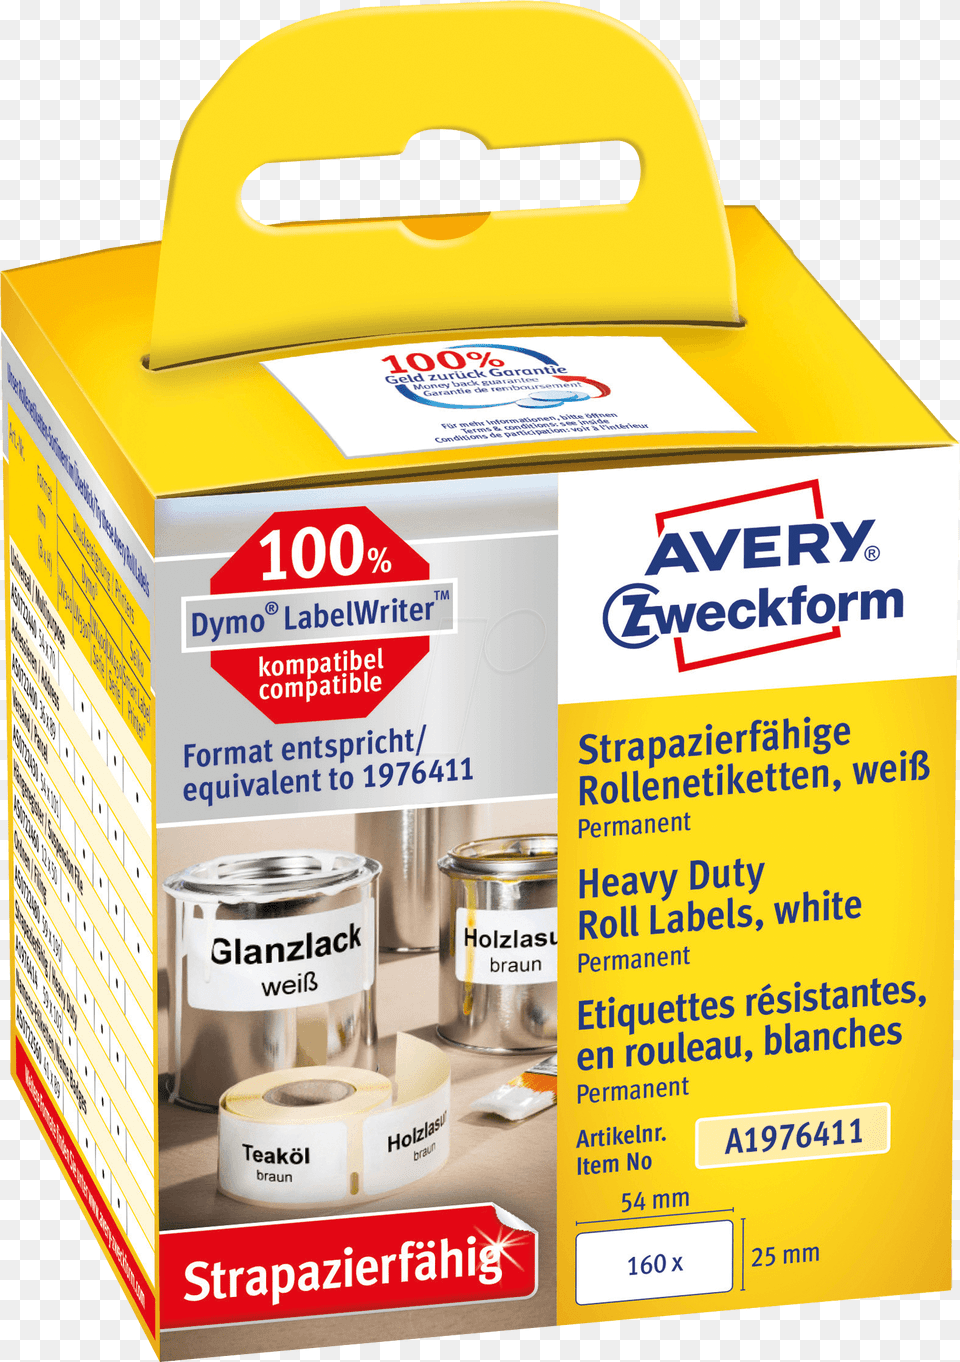 Roll Label White Avery Zweckform Label, Tape, Box Png Image